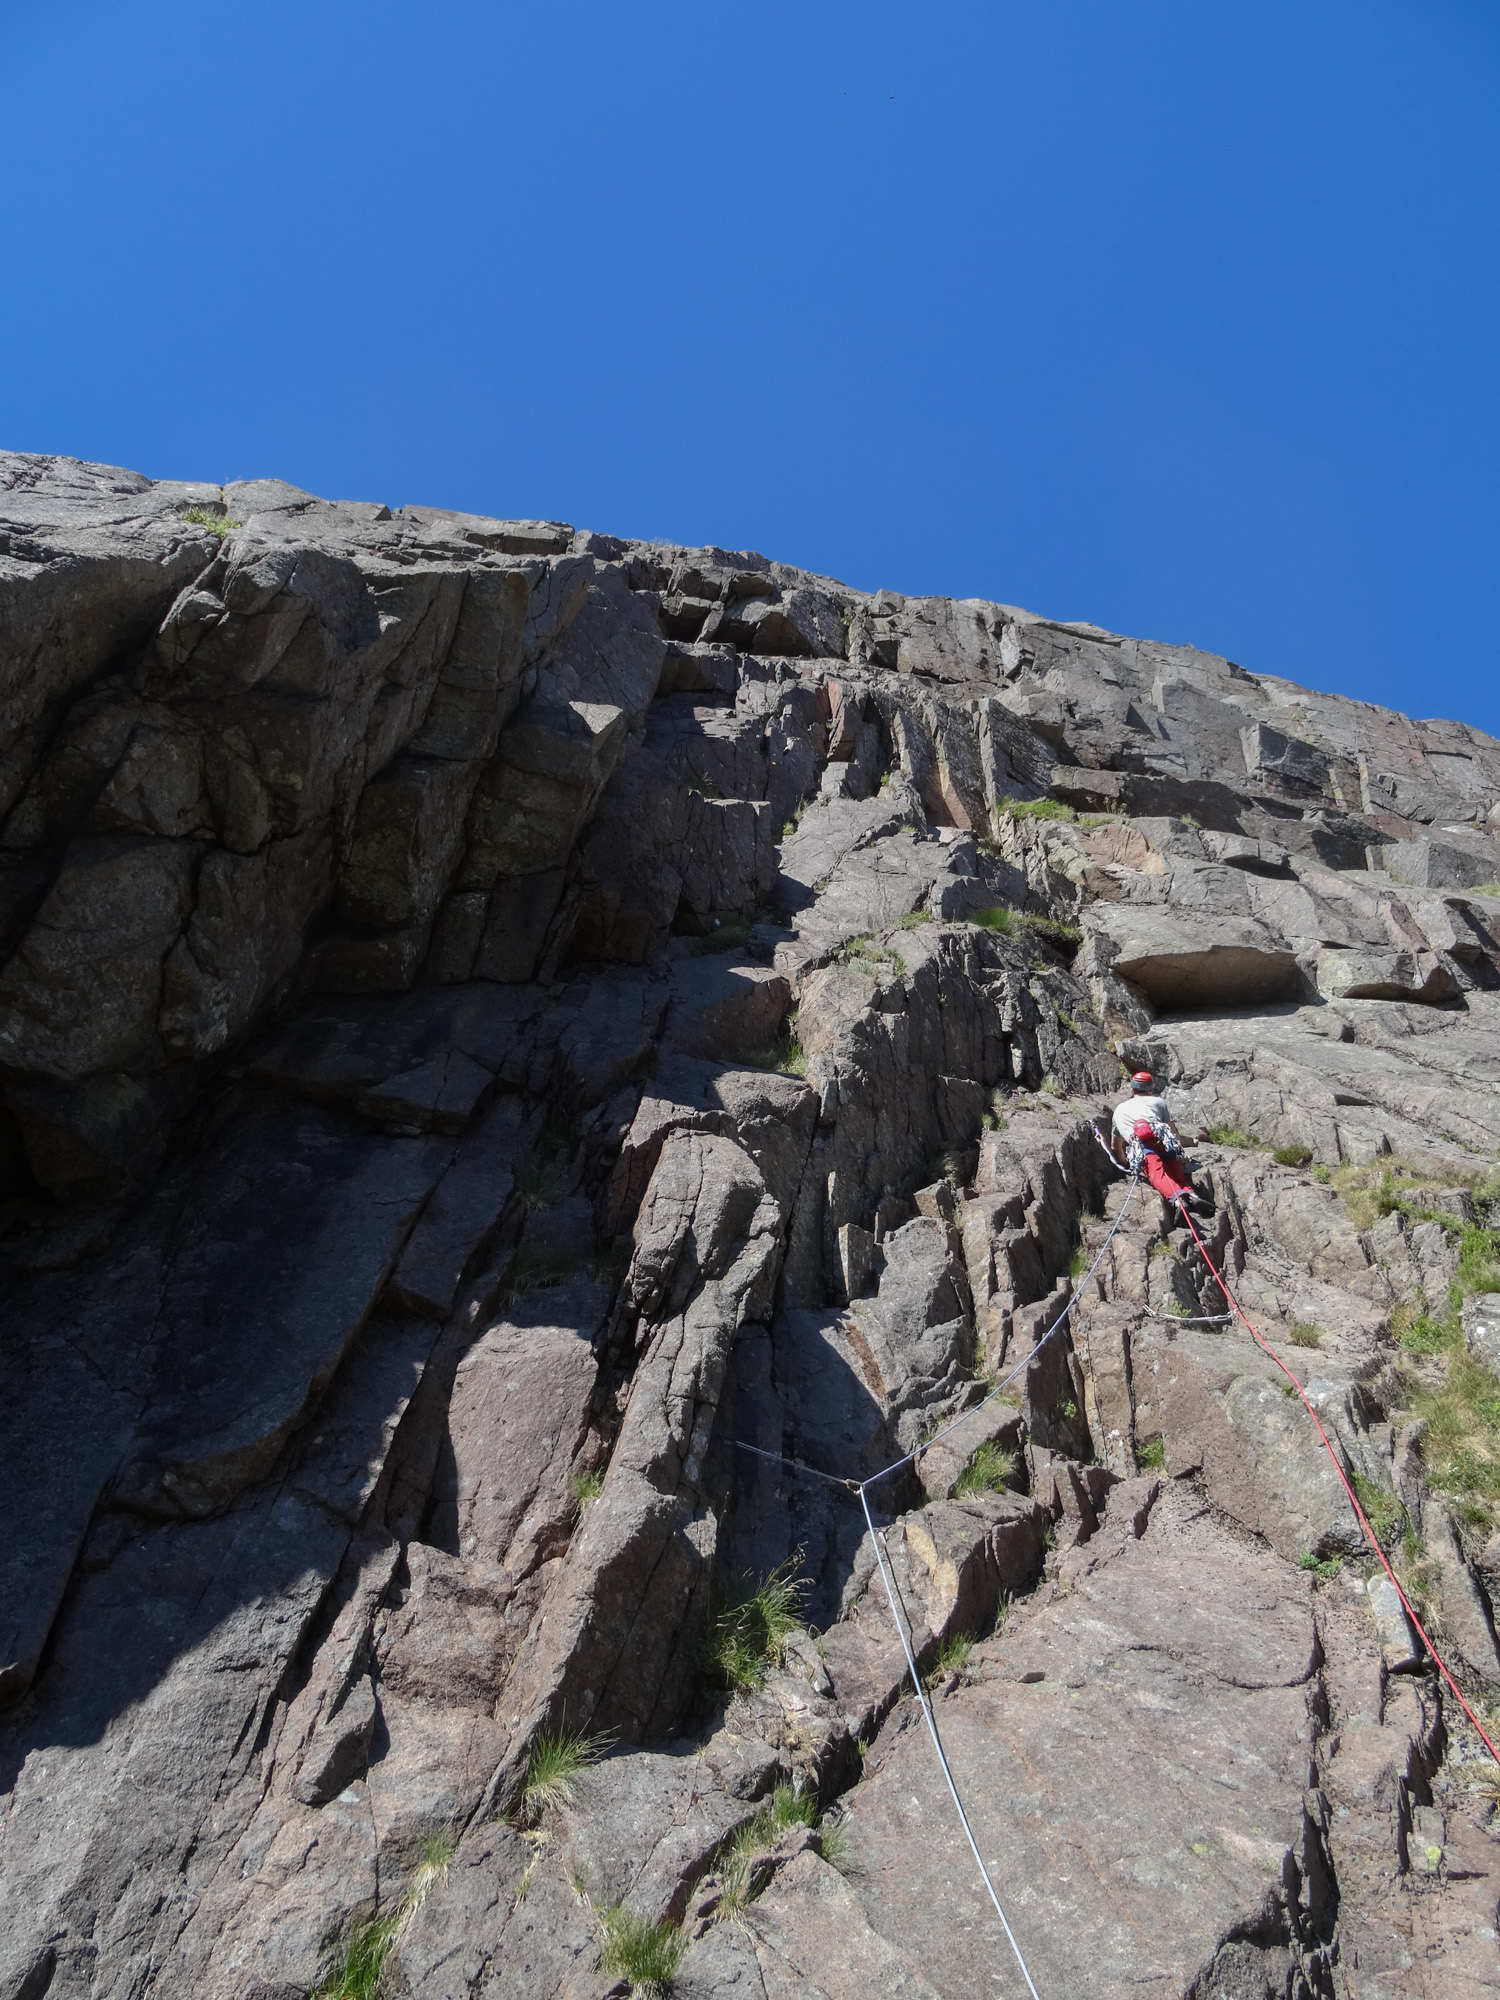 Stepping off the ground and immediately off-route. One of these days I'll read the guide properly! The correct route follows the sun-shadow line up the cracked groove, before heading left across ledges to the slab above. Photo credit: Callum Johnson